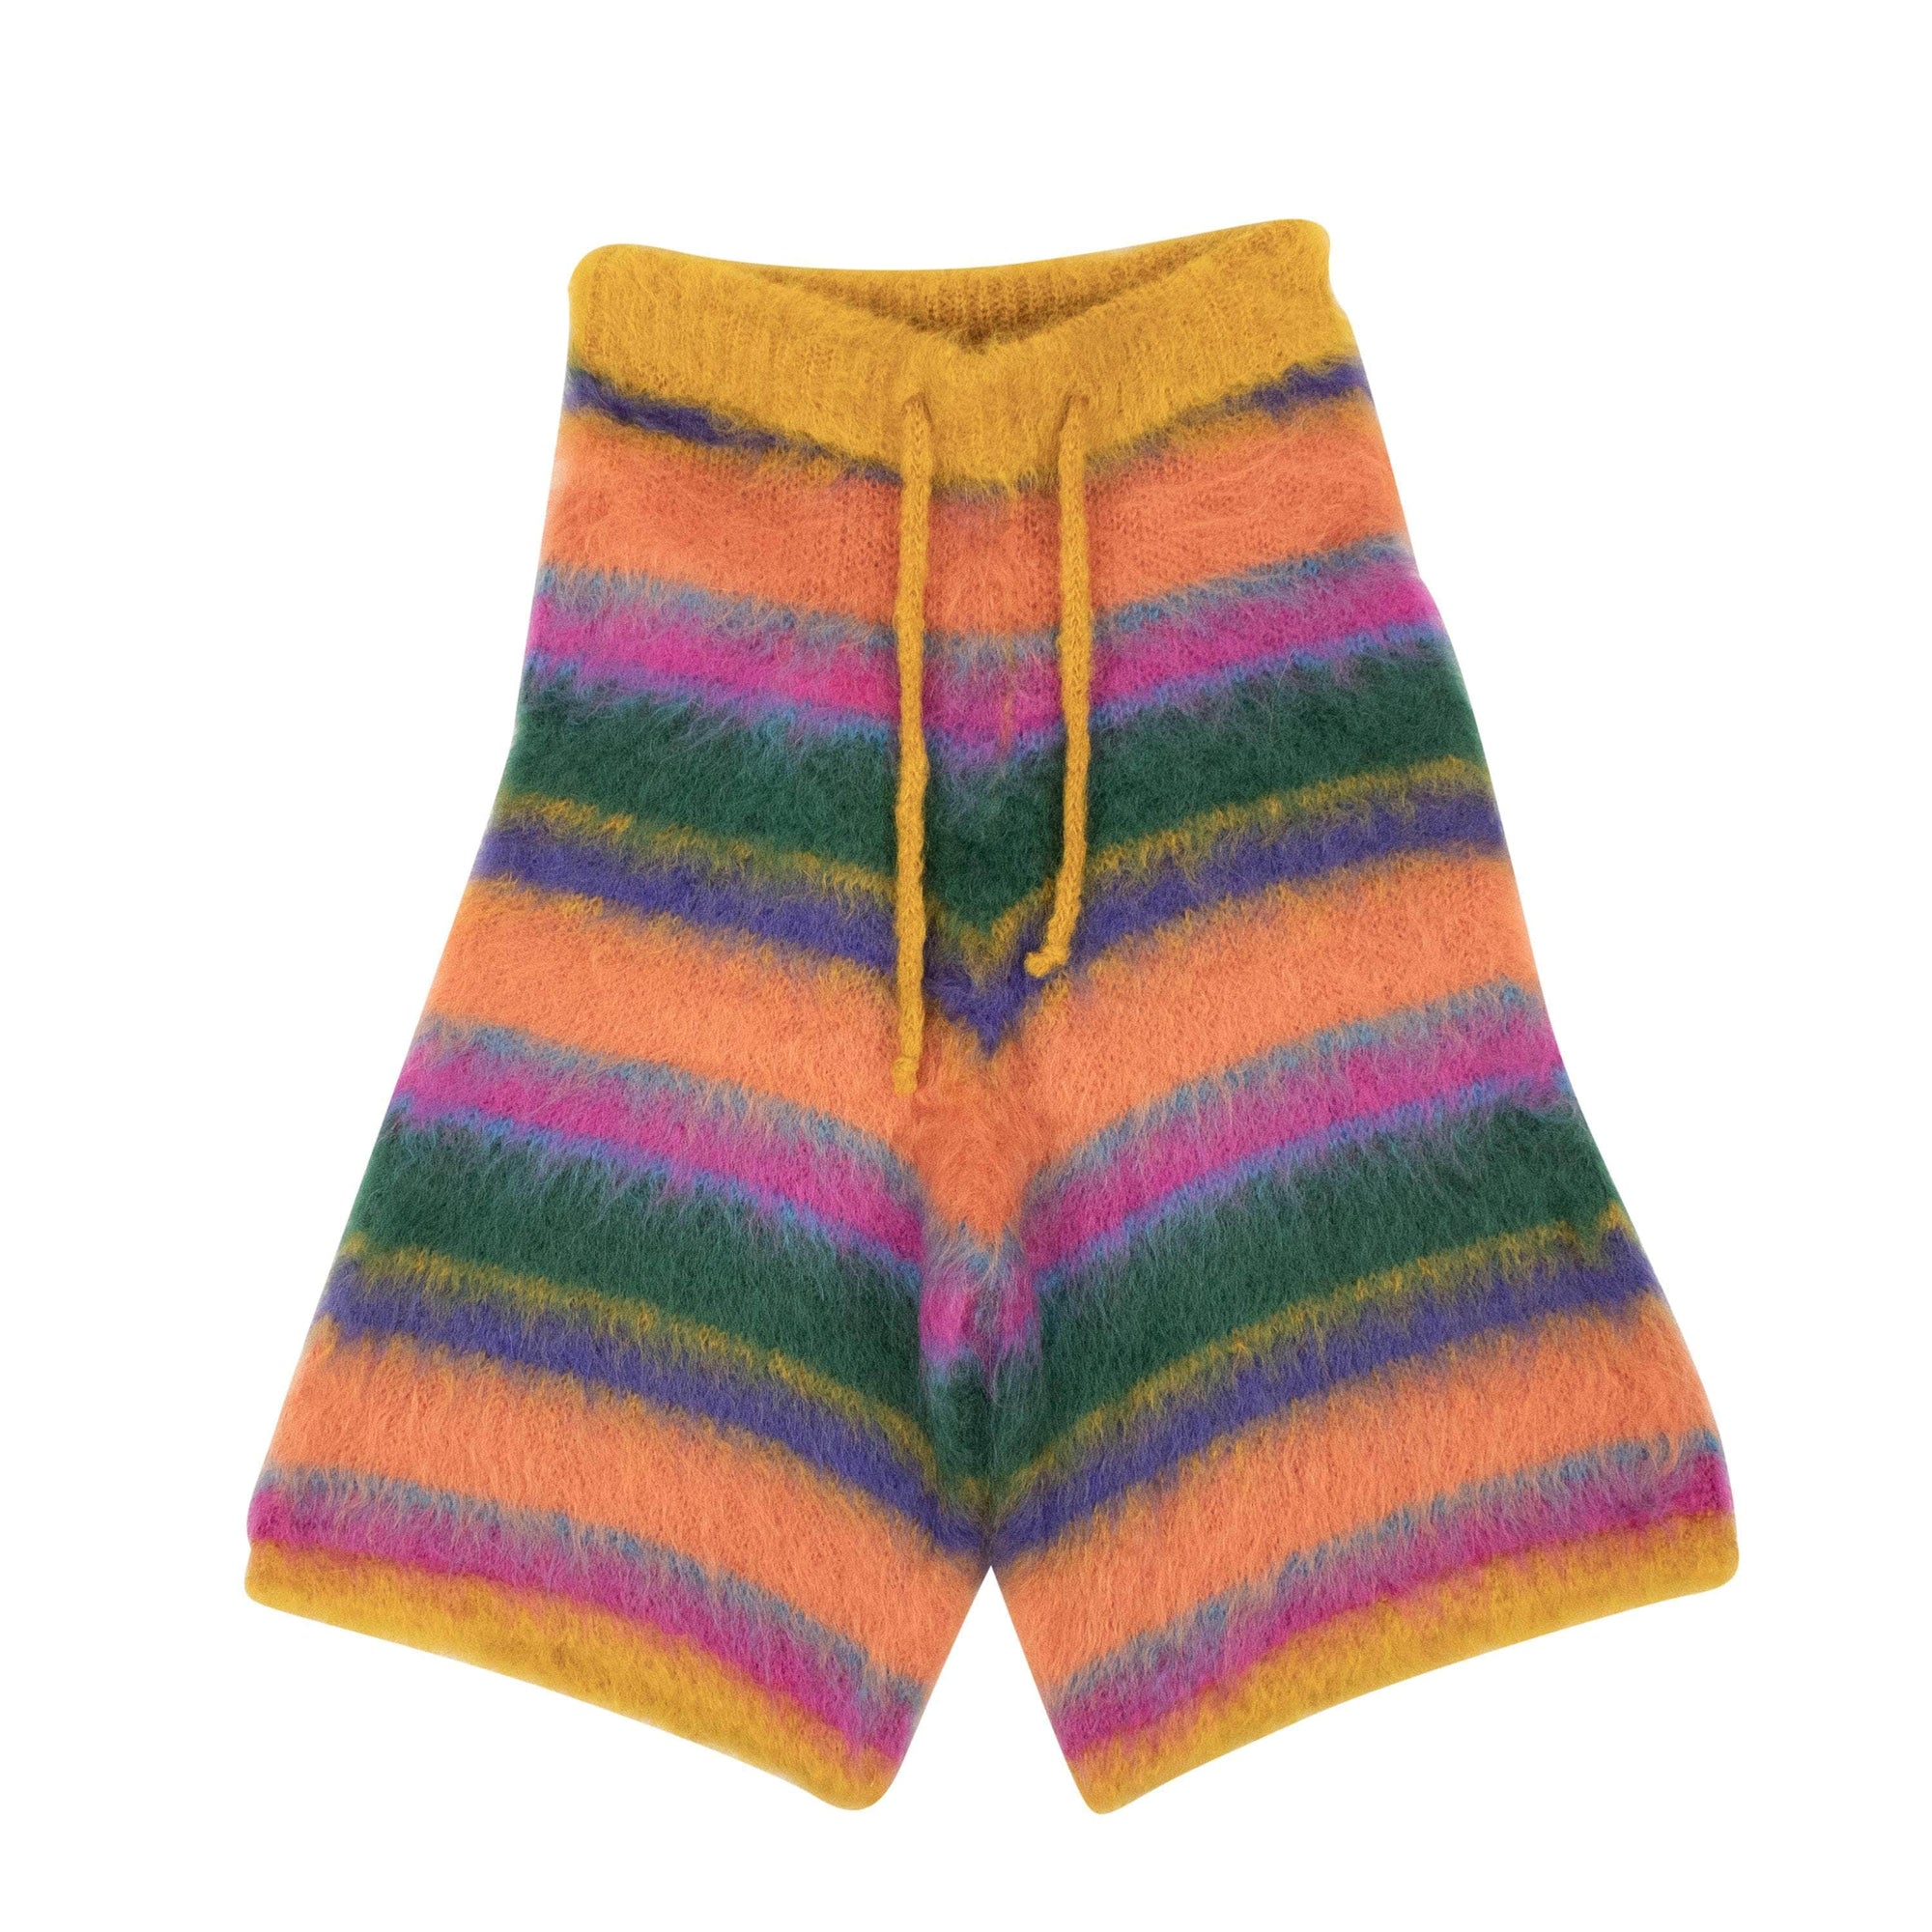 Marni channelenable-all, chicmi, couponcollection, gender-mens, main-clothing 46 Multicolored Fuzzy Striped Shorts MRN-XBTM-0010/46 MRN-XBTM-0010/46